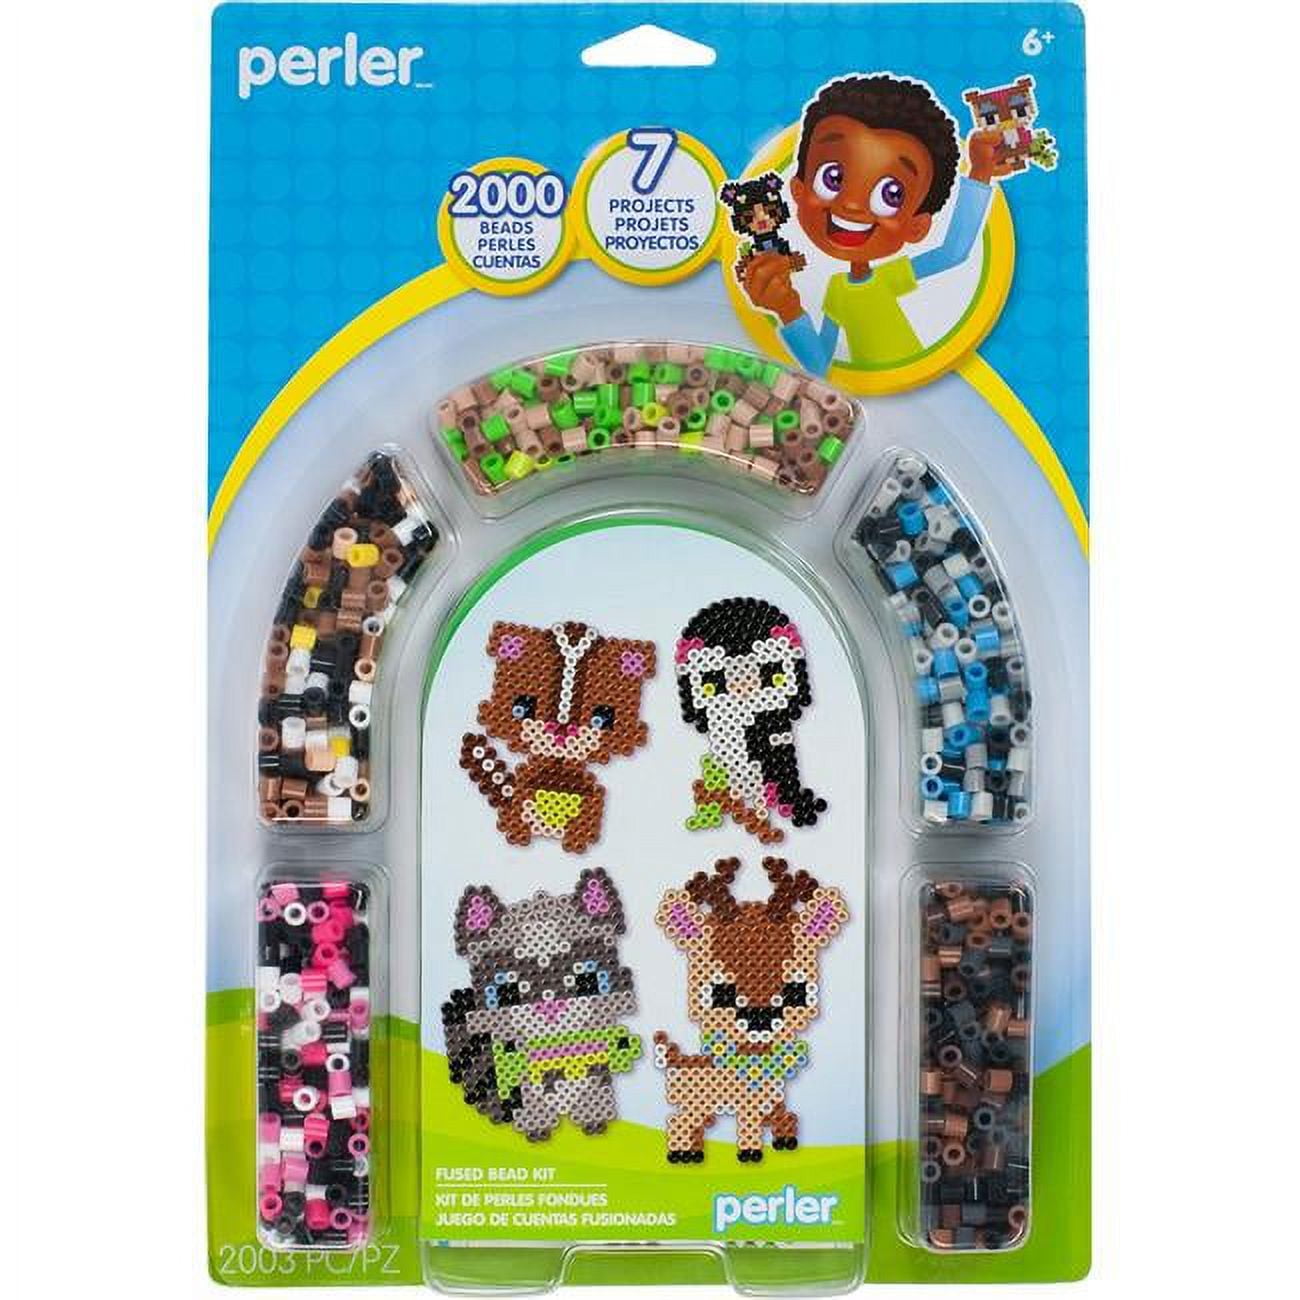  Perler Pet Parade Deluxe Fuse Bead Craft Activity Kit, 5020 pcs  & Beads Bulk Assorted Multicolor Fuse Beads for Kids Crafts, 22000 pcs :  Arts, Crafts & Sewing